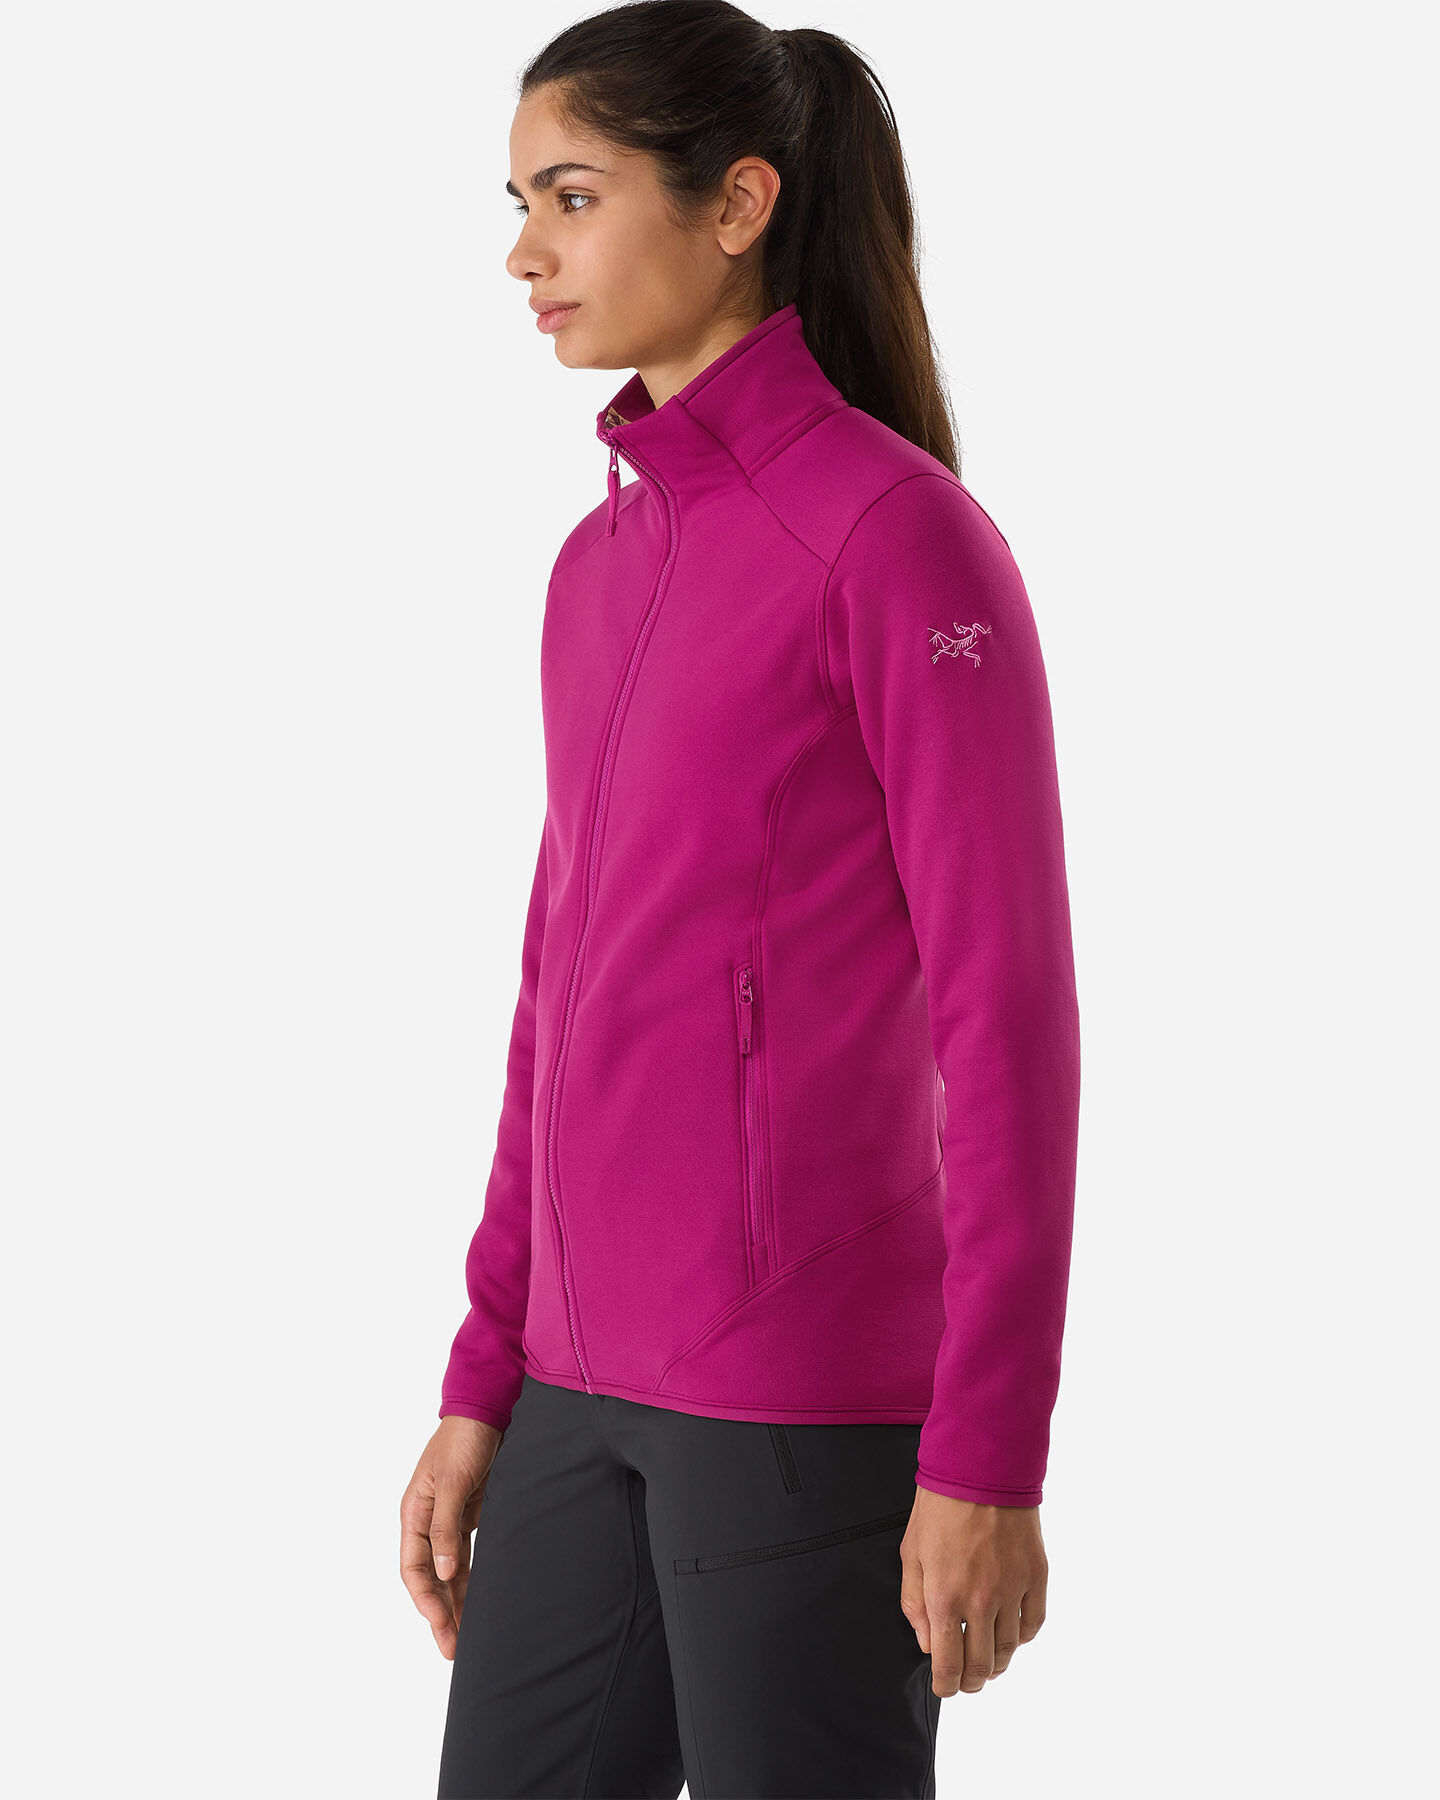  Pile ARC'TERYX KYANITE SYNTH W S4114898|1|S scatto 4